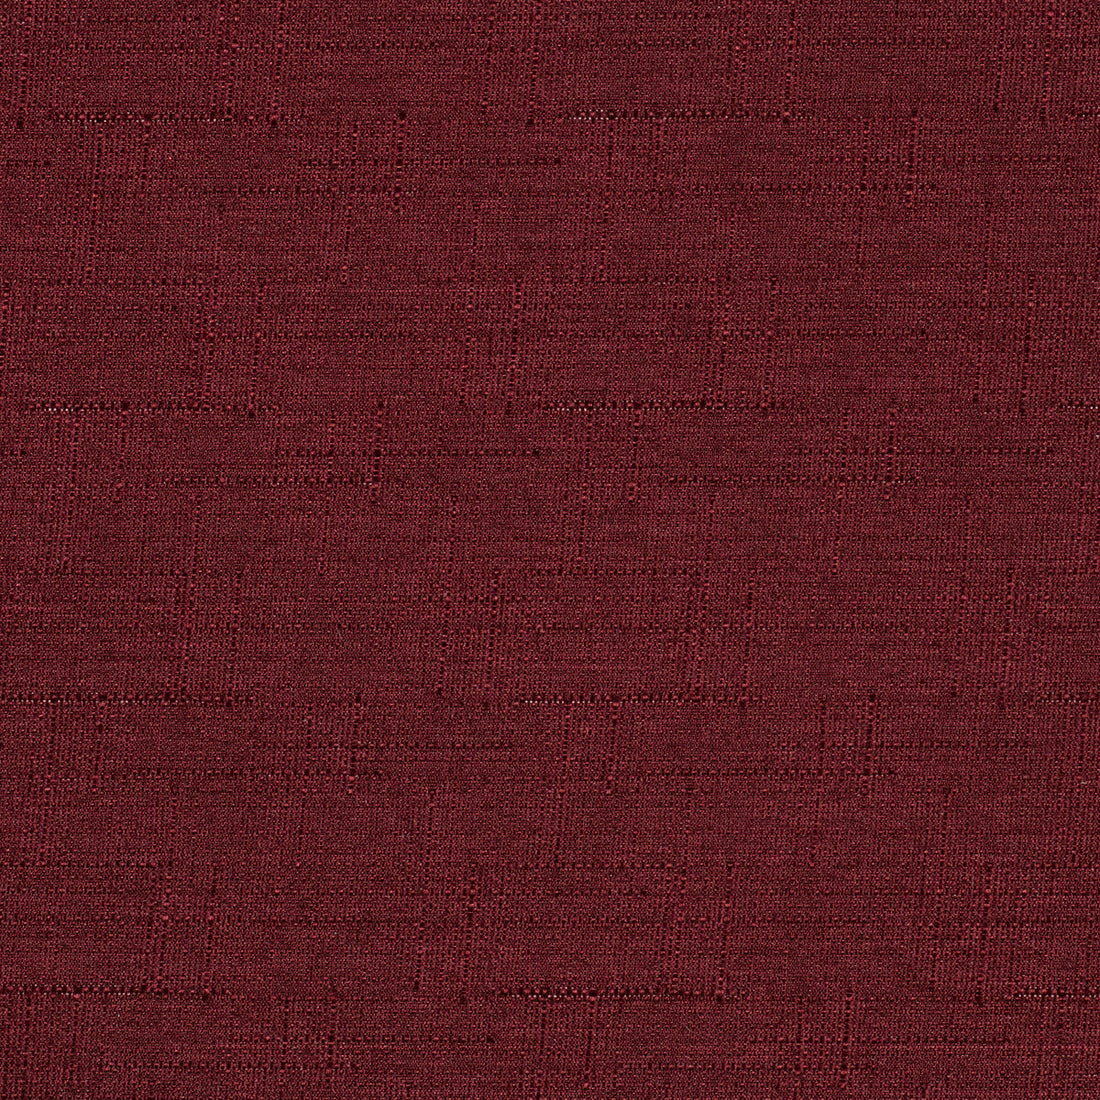 Kravet Contract fabric in 4317-9 color - pattern 4317.9.0 - by Kravet Contract